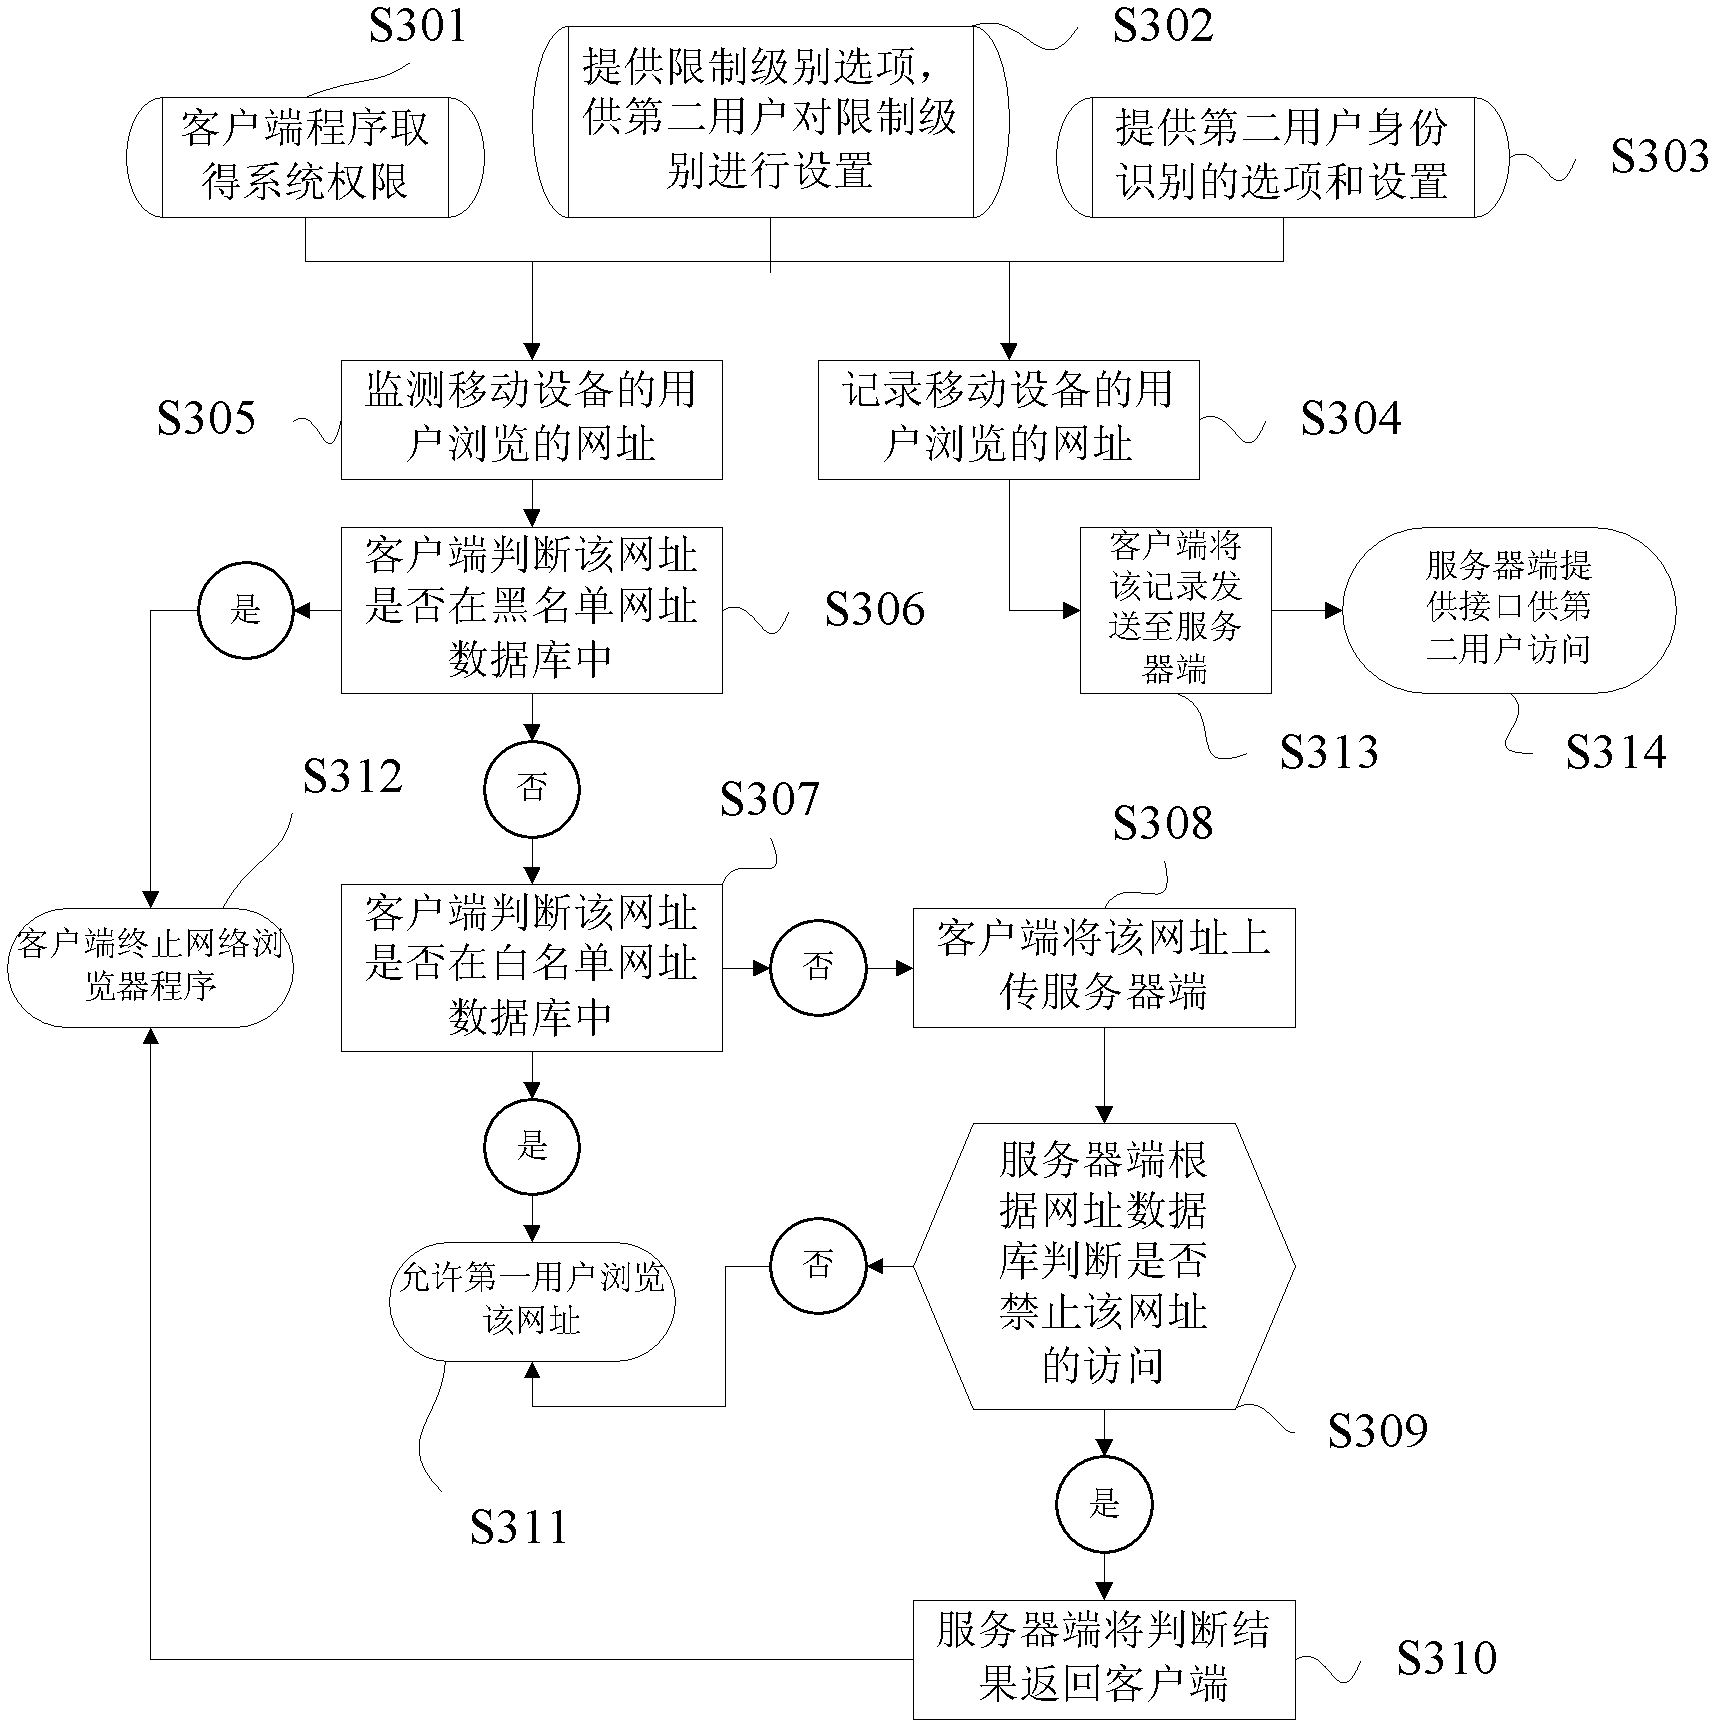 Method and system for conducting parental control over mobile equipment